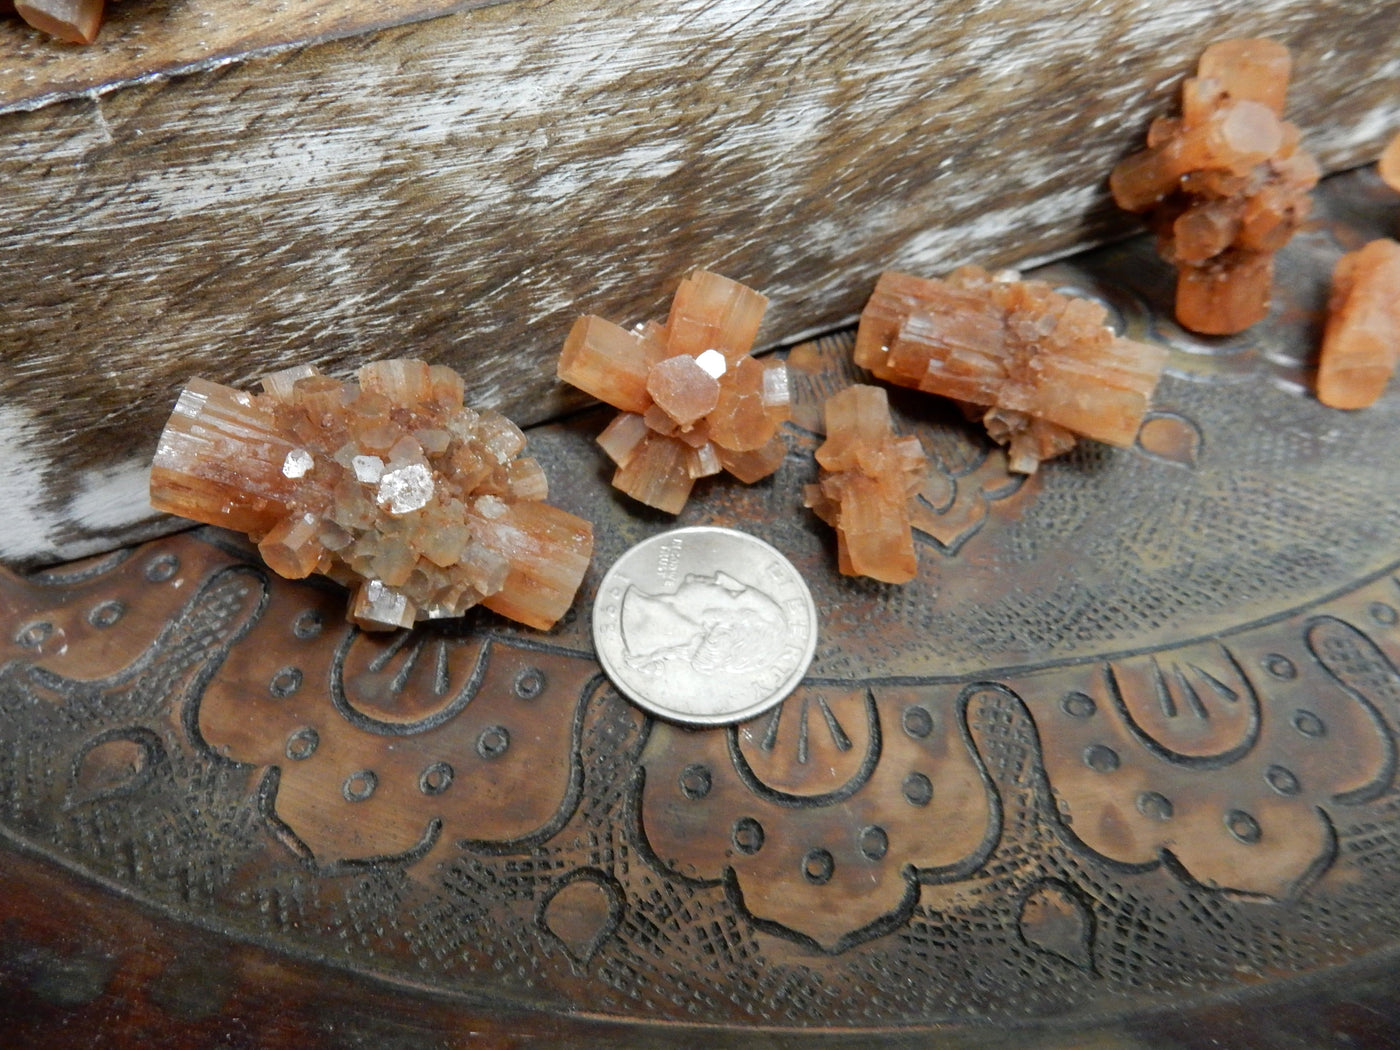 aragonite rods next to a quarter for size reference